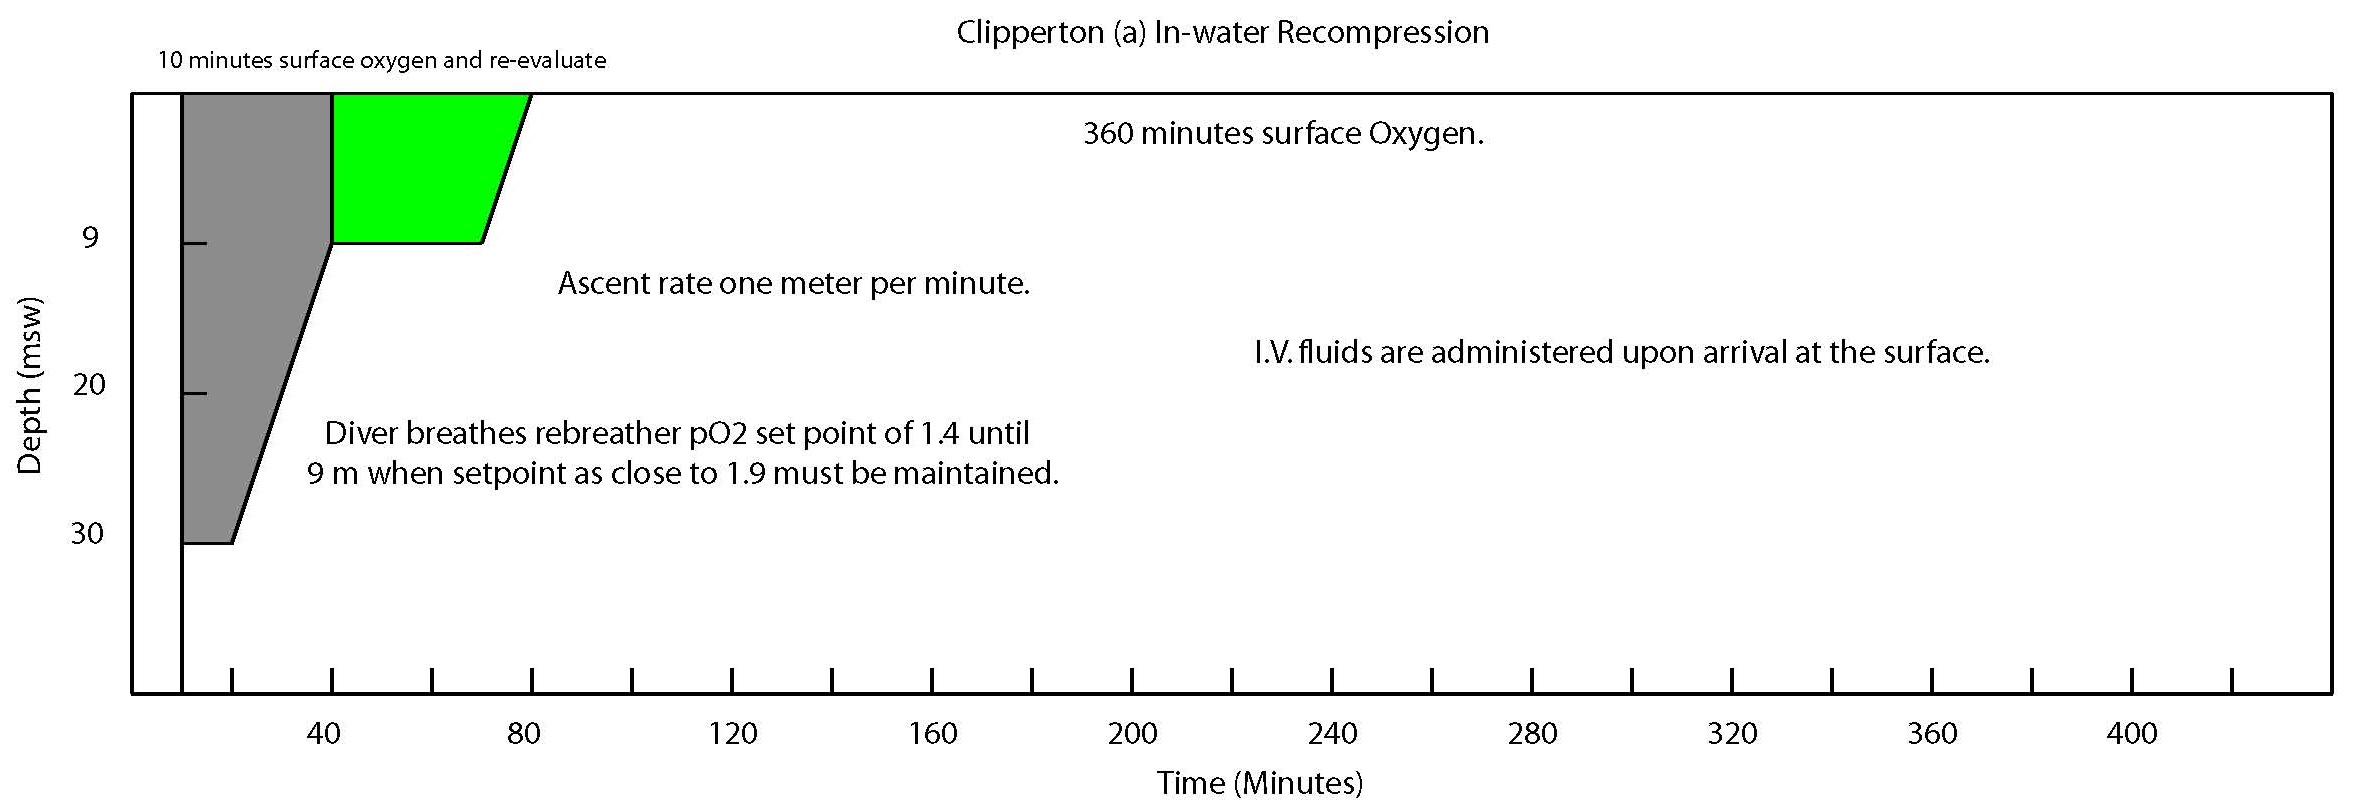 Clipperton(a) In-water Recompression Table